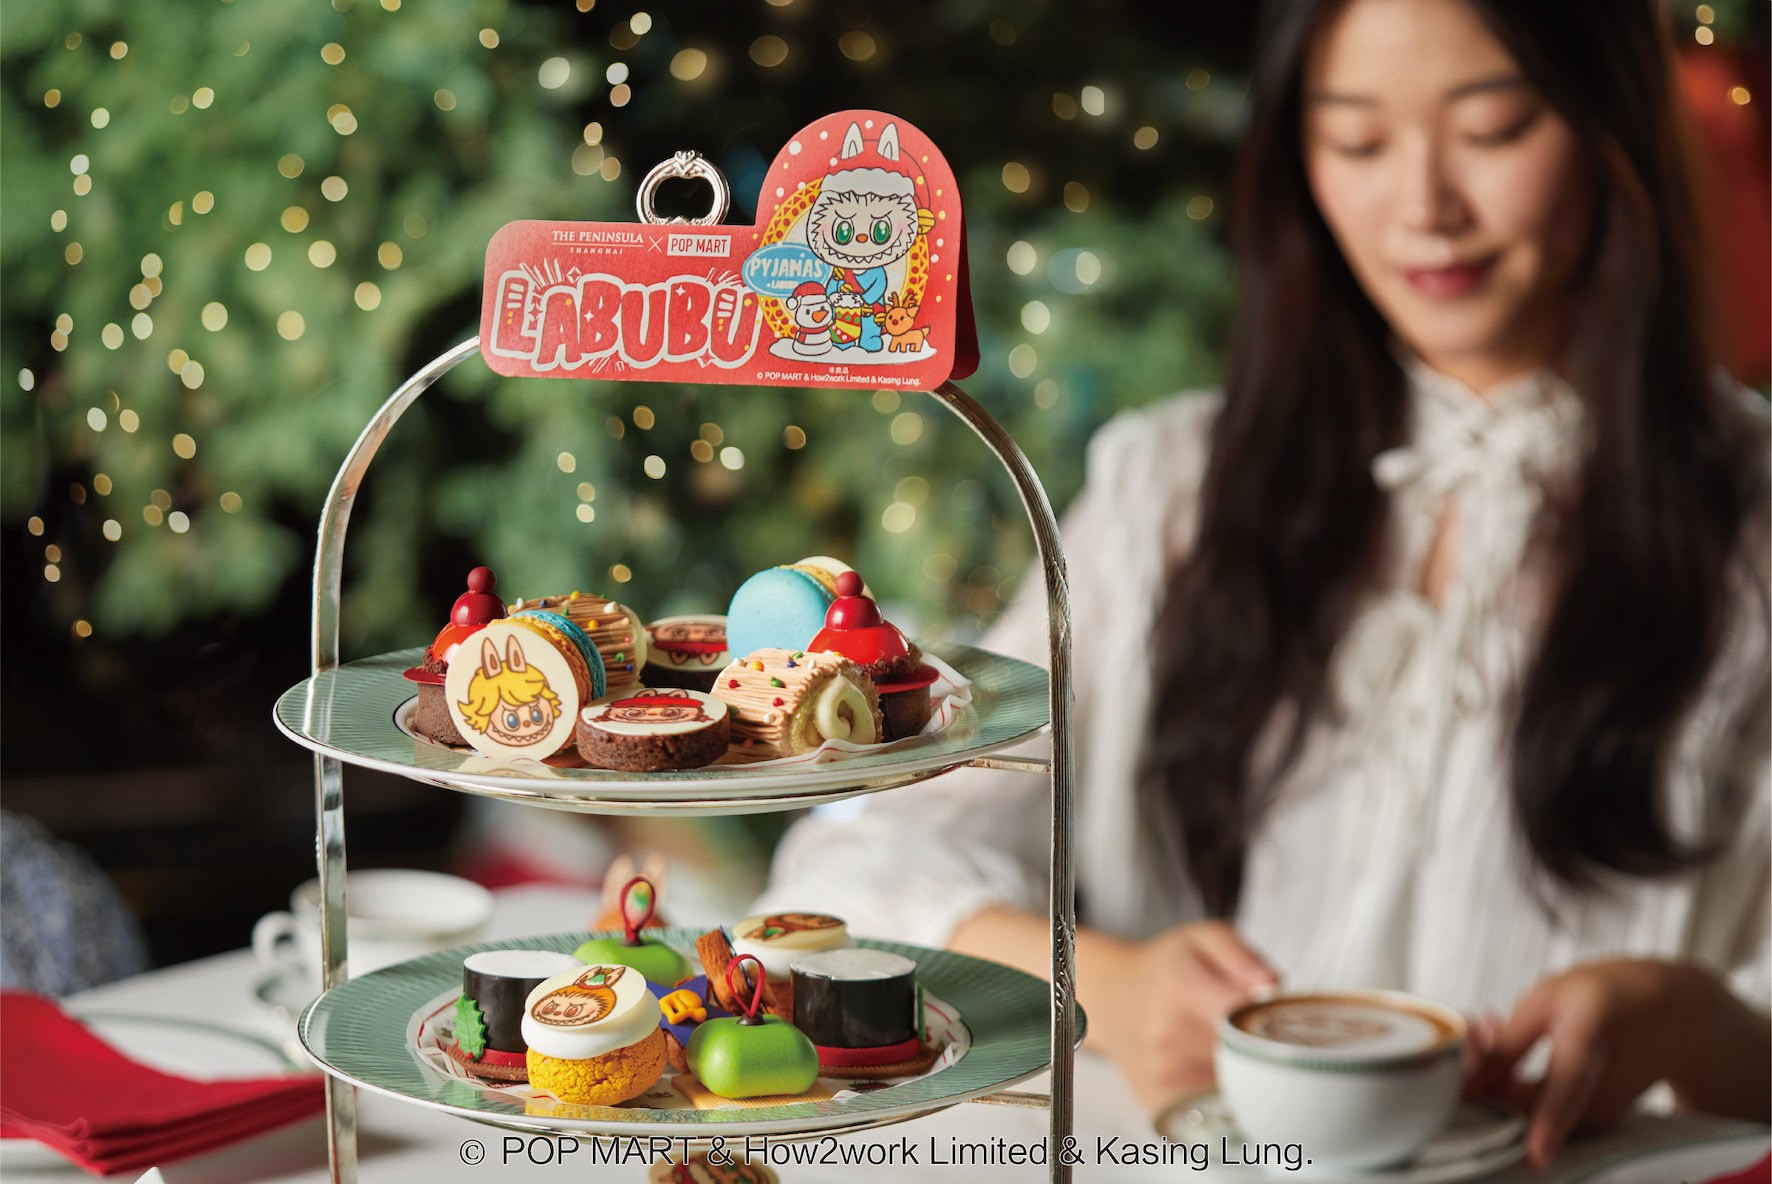 The Peninsula Partners with POP MART to Launch a Limited LABUBU Afternoon Tea